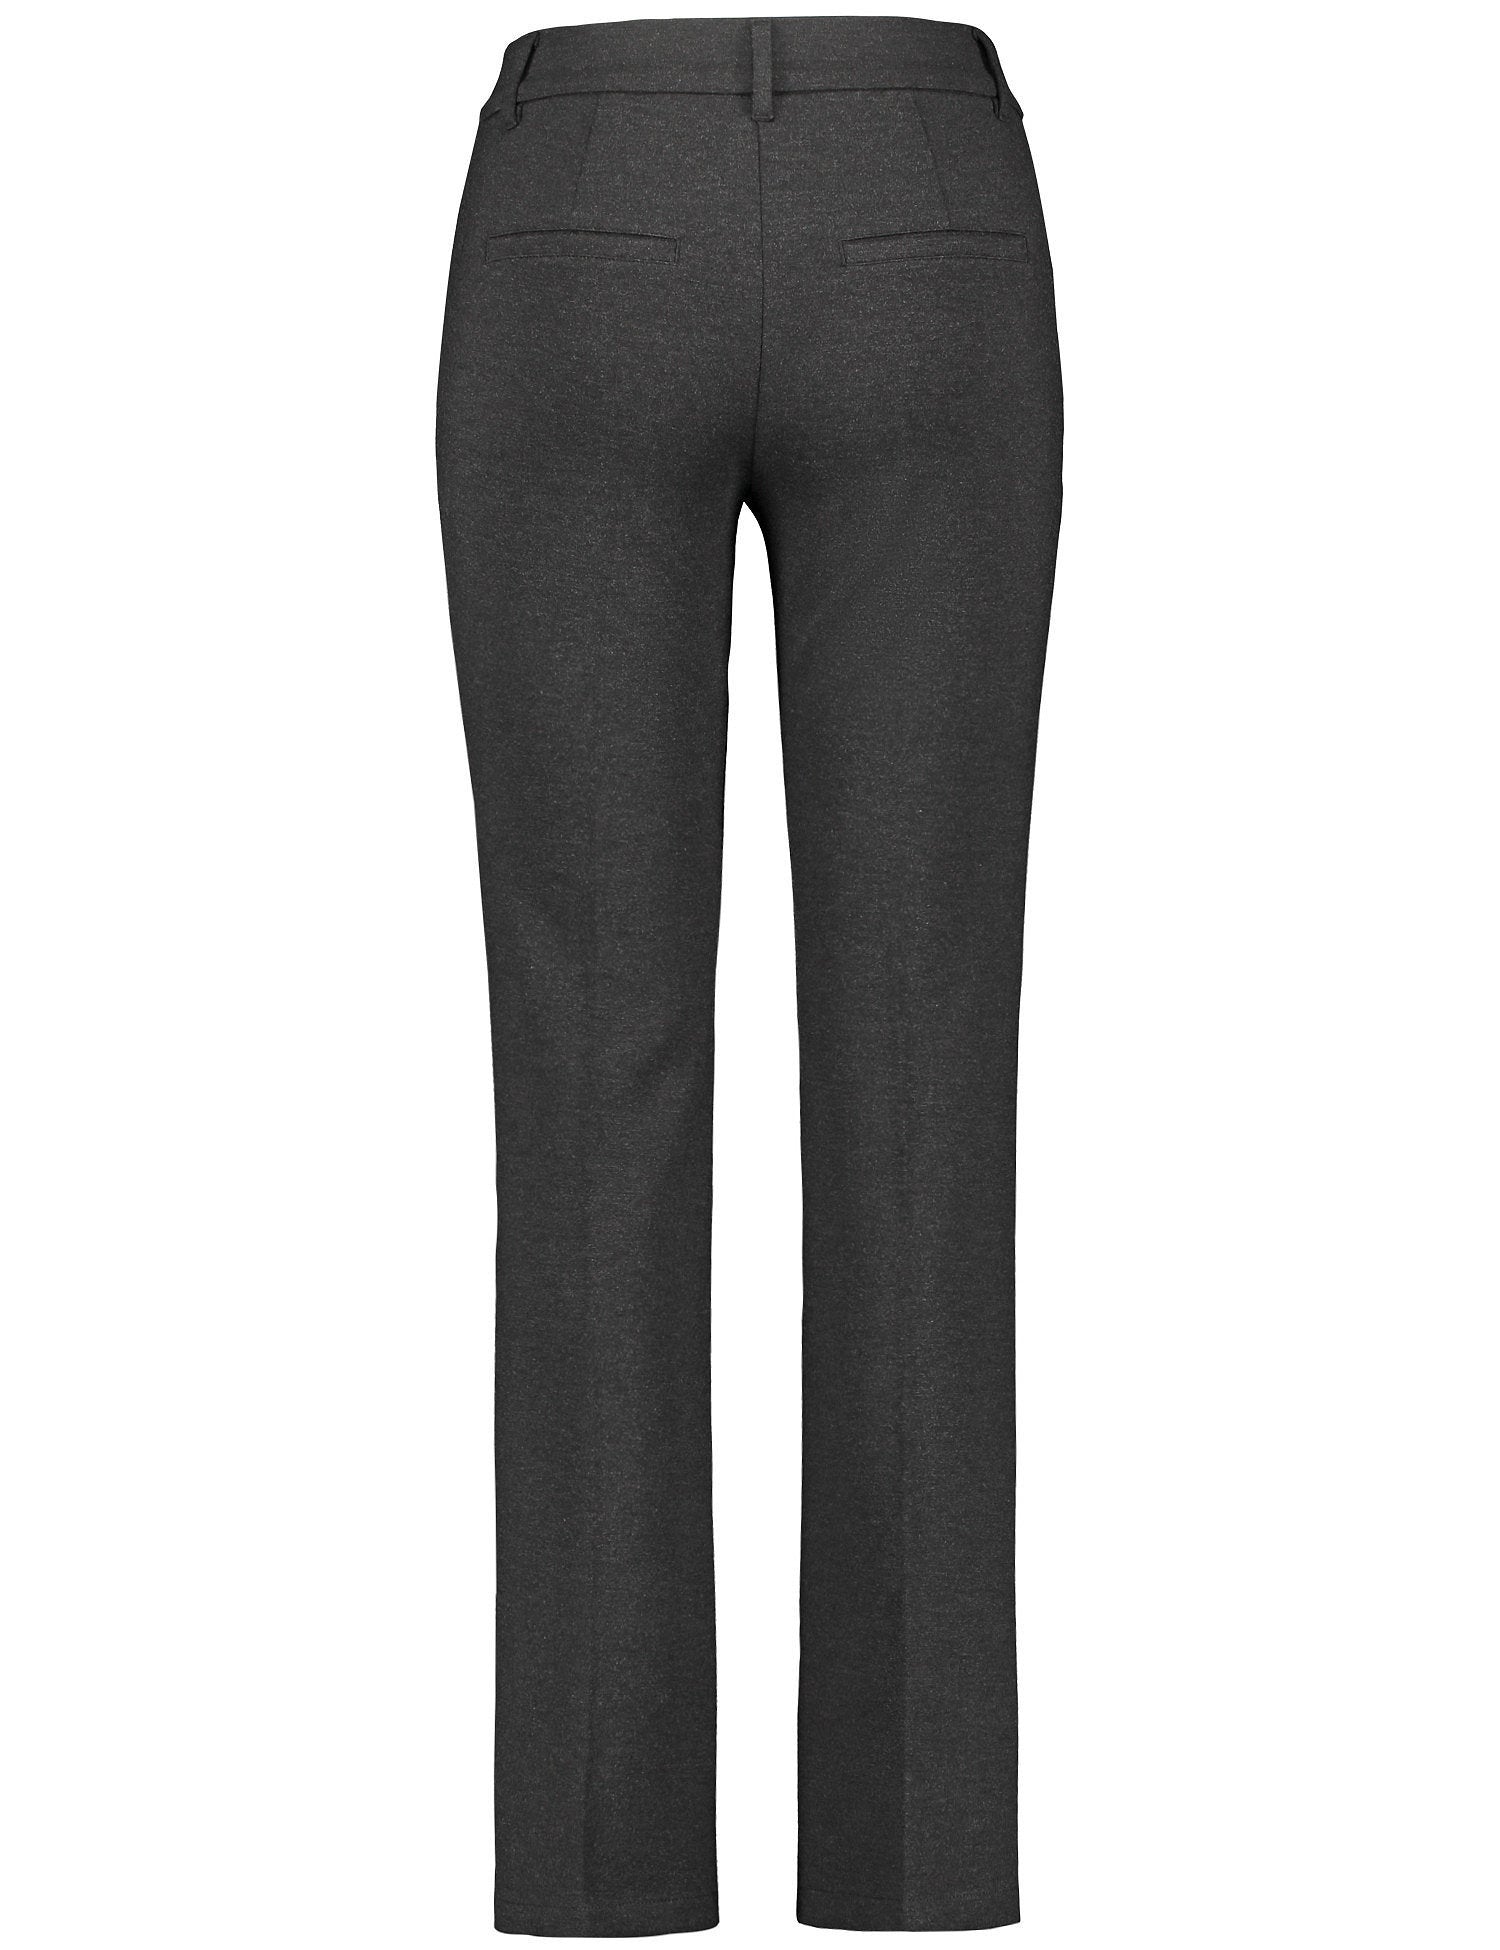 Flared Trousers With Vertical Pintucks And Added Stretch_122018-66311_202690_03